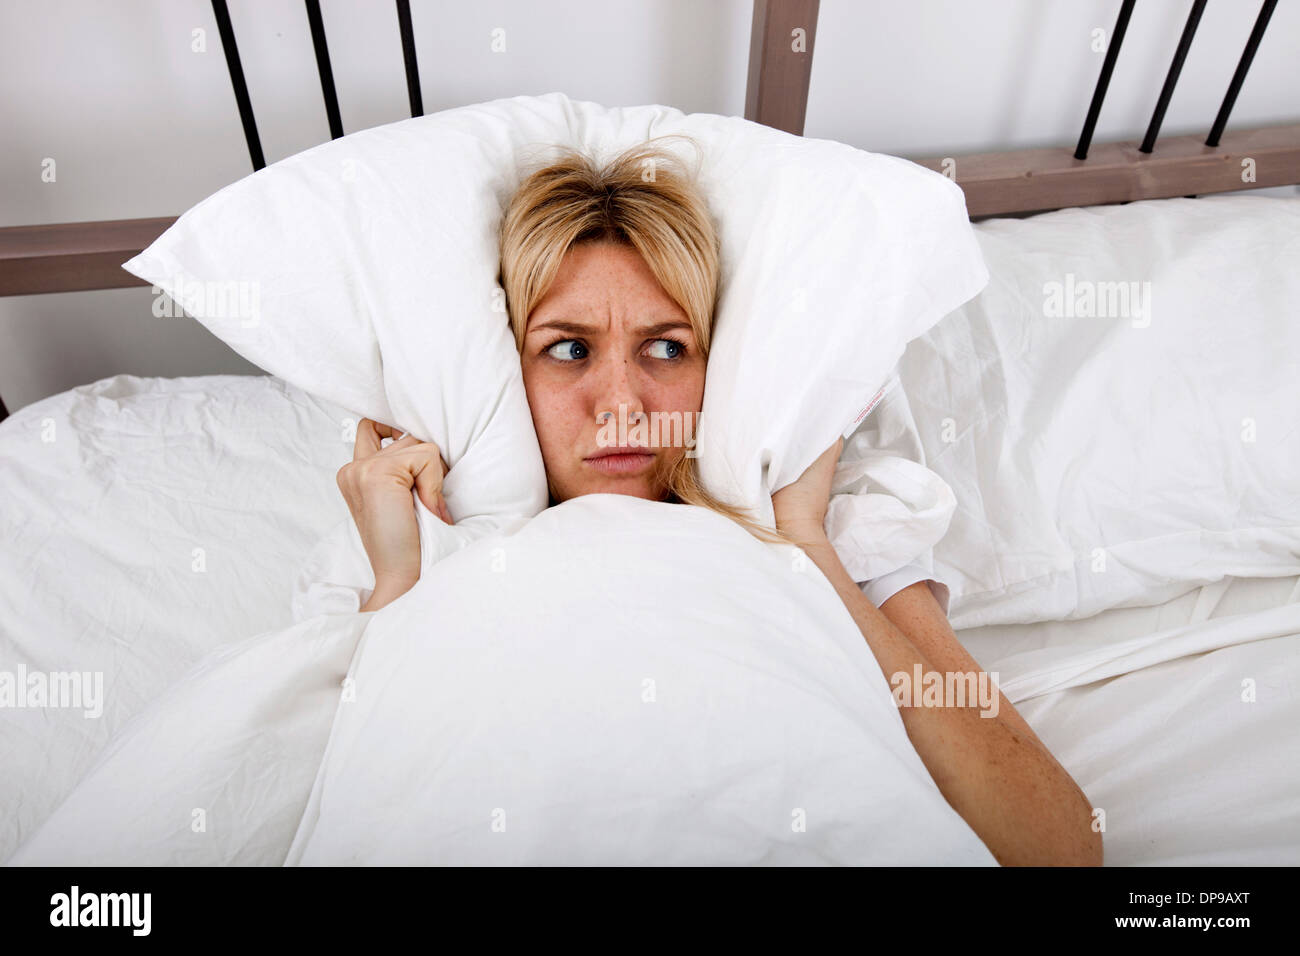 Young woman covering ears with pillow in bed Stock Photo